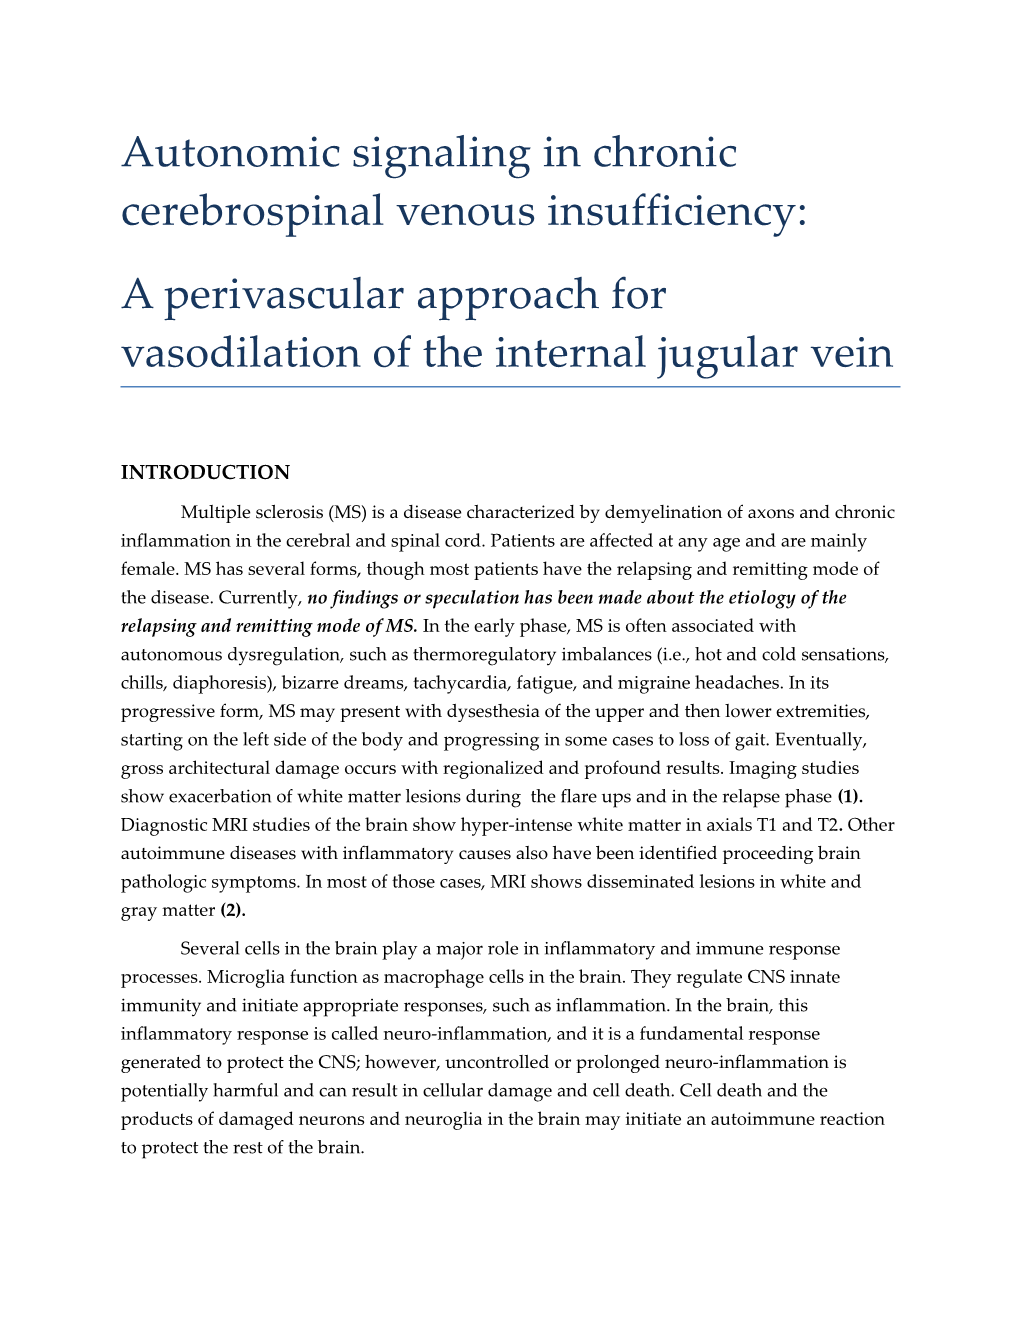 Autonomic Signaling in Chronic Cerebrospinal Venous Insufficiency